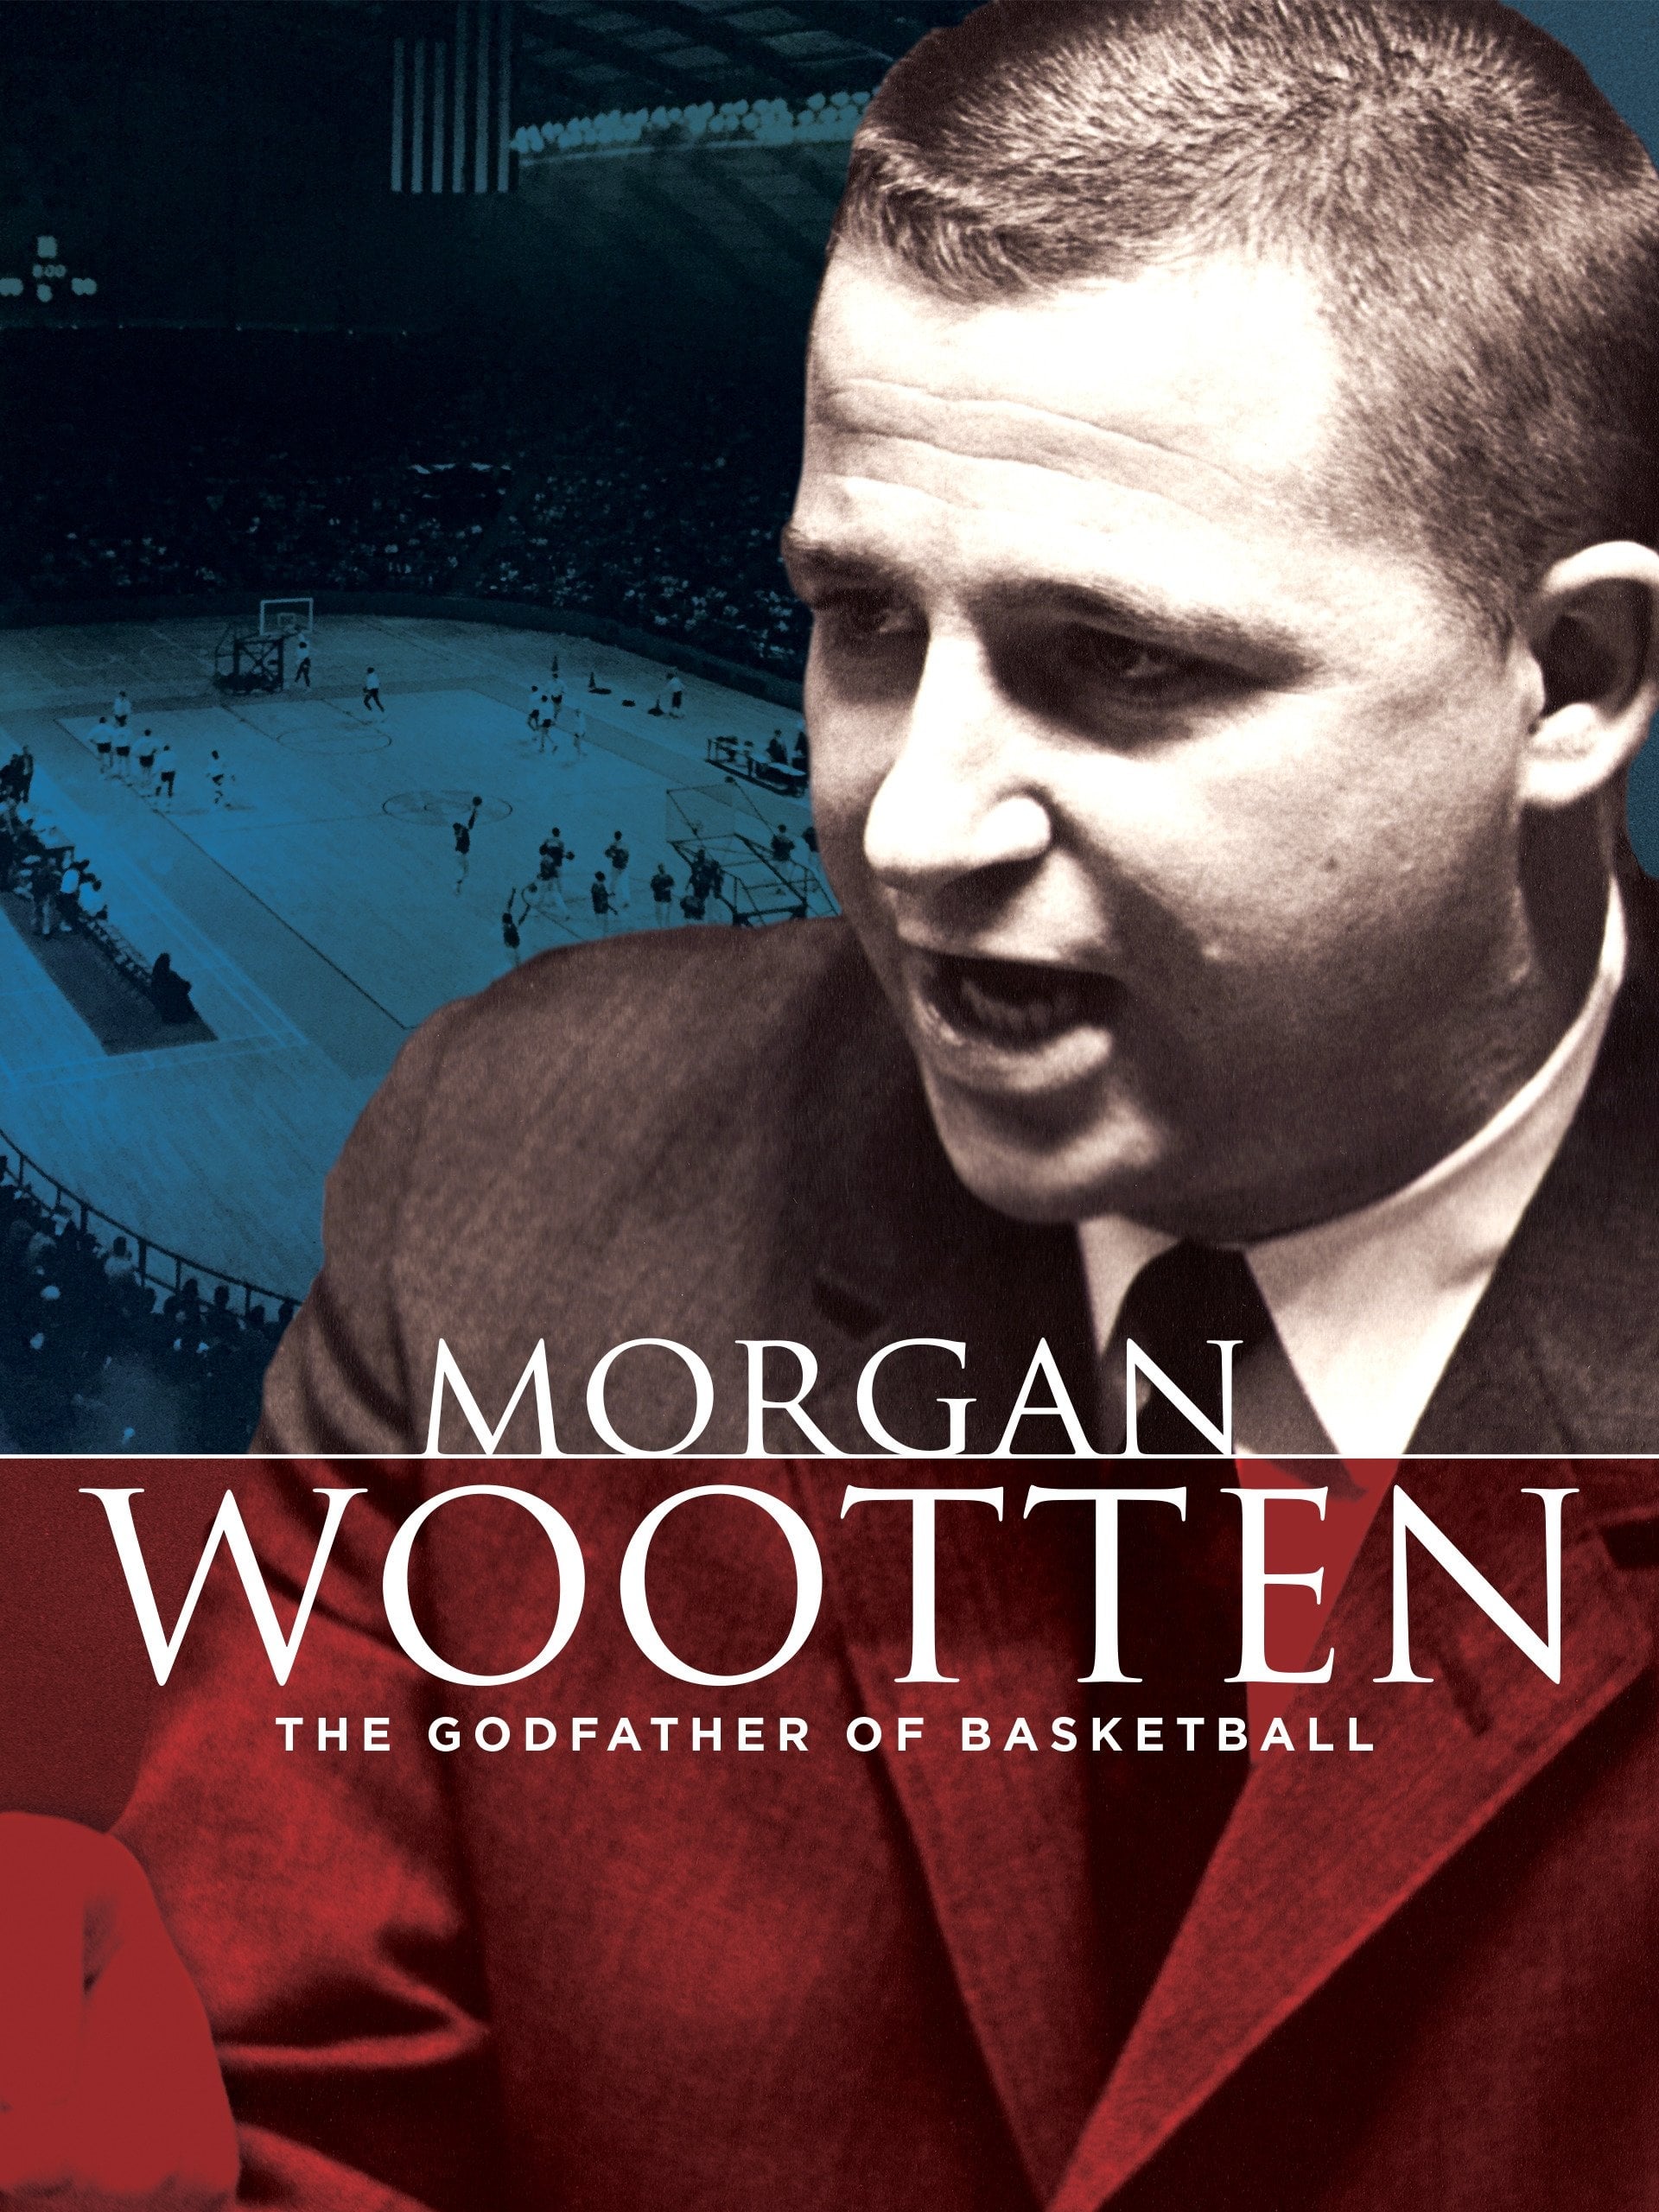 Morgan Wootten: The Godfather of Basketball